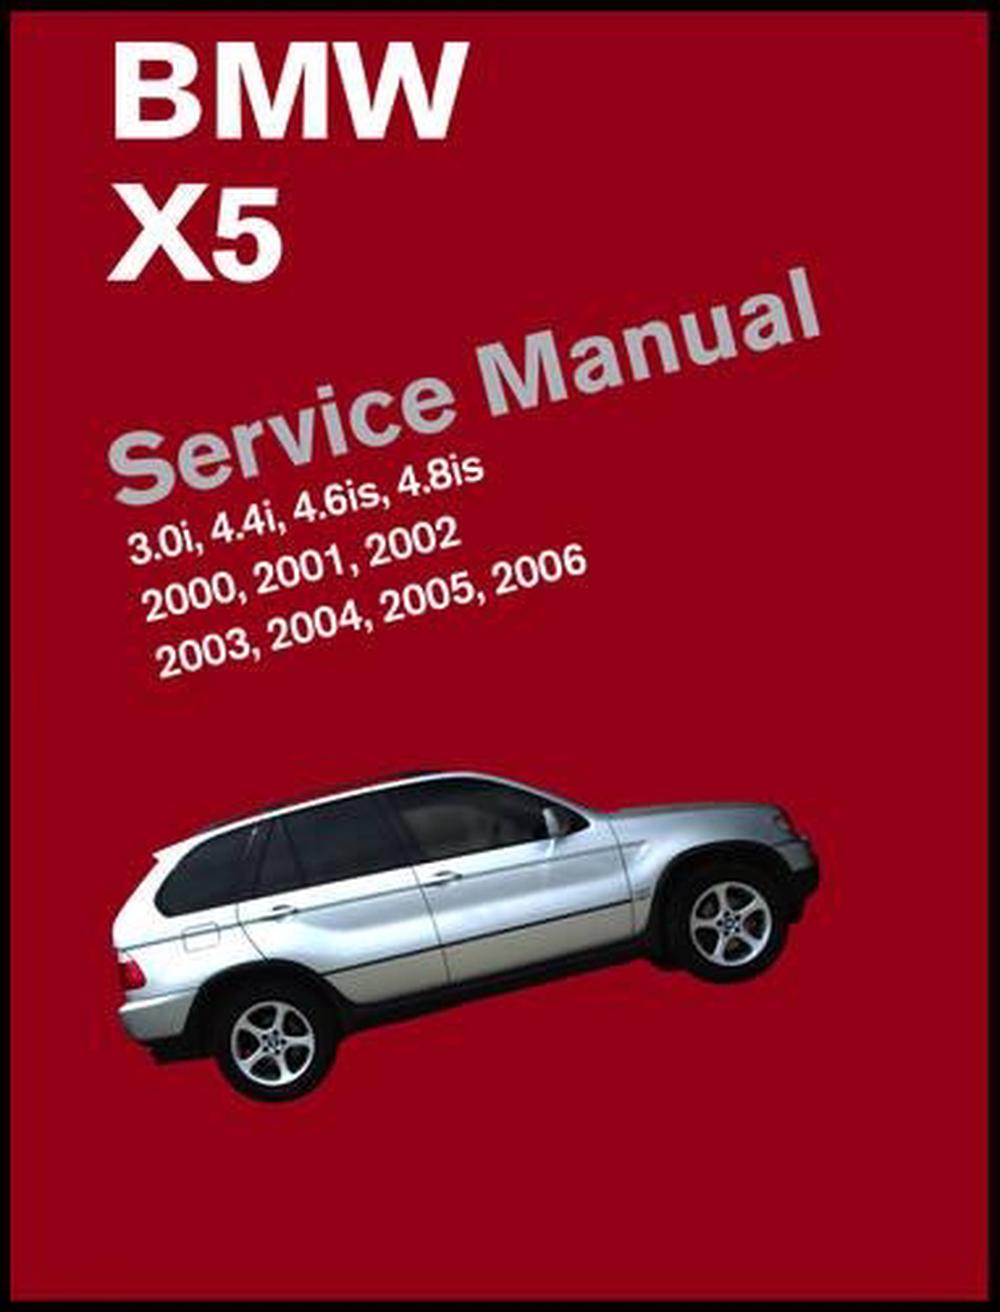 bentley service manual for the bmw x5 (e53) - 1999 to 2006